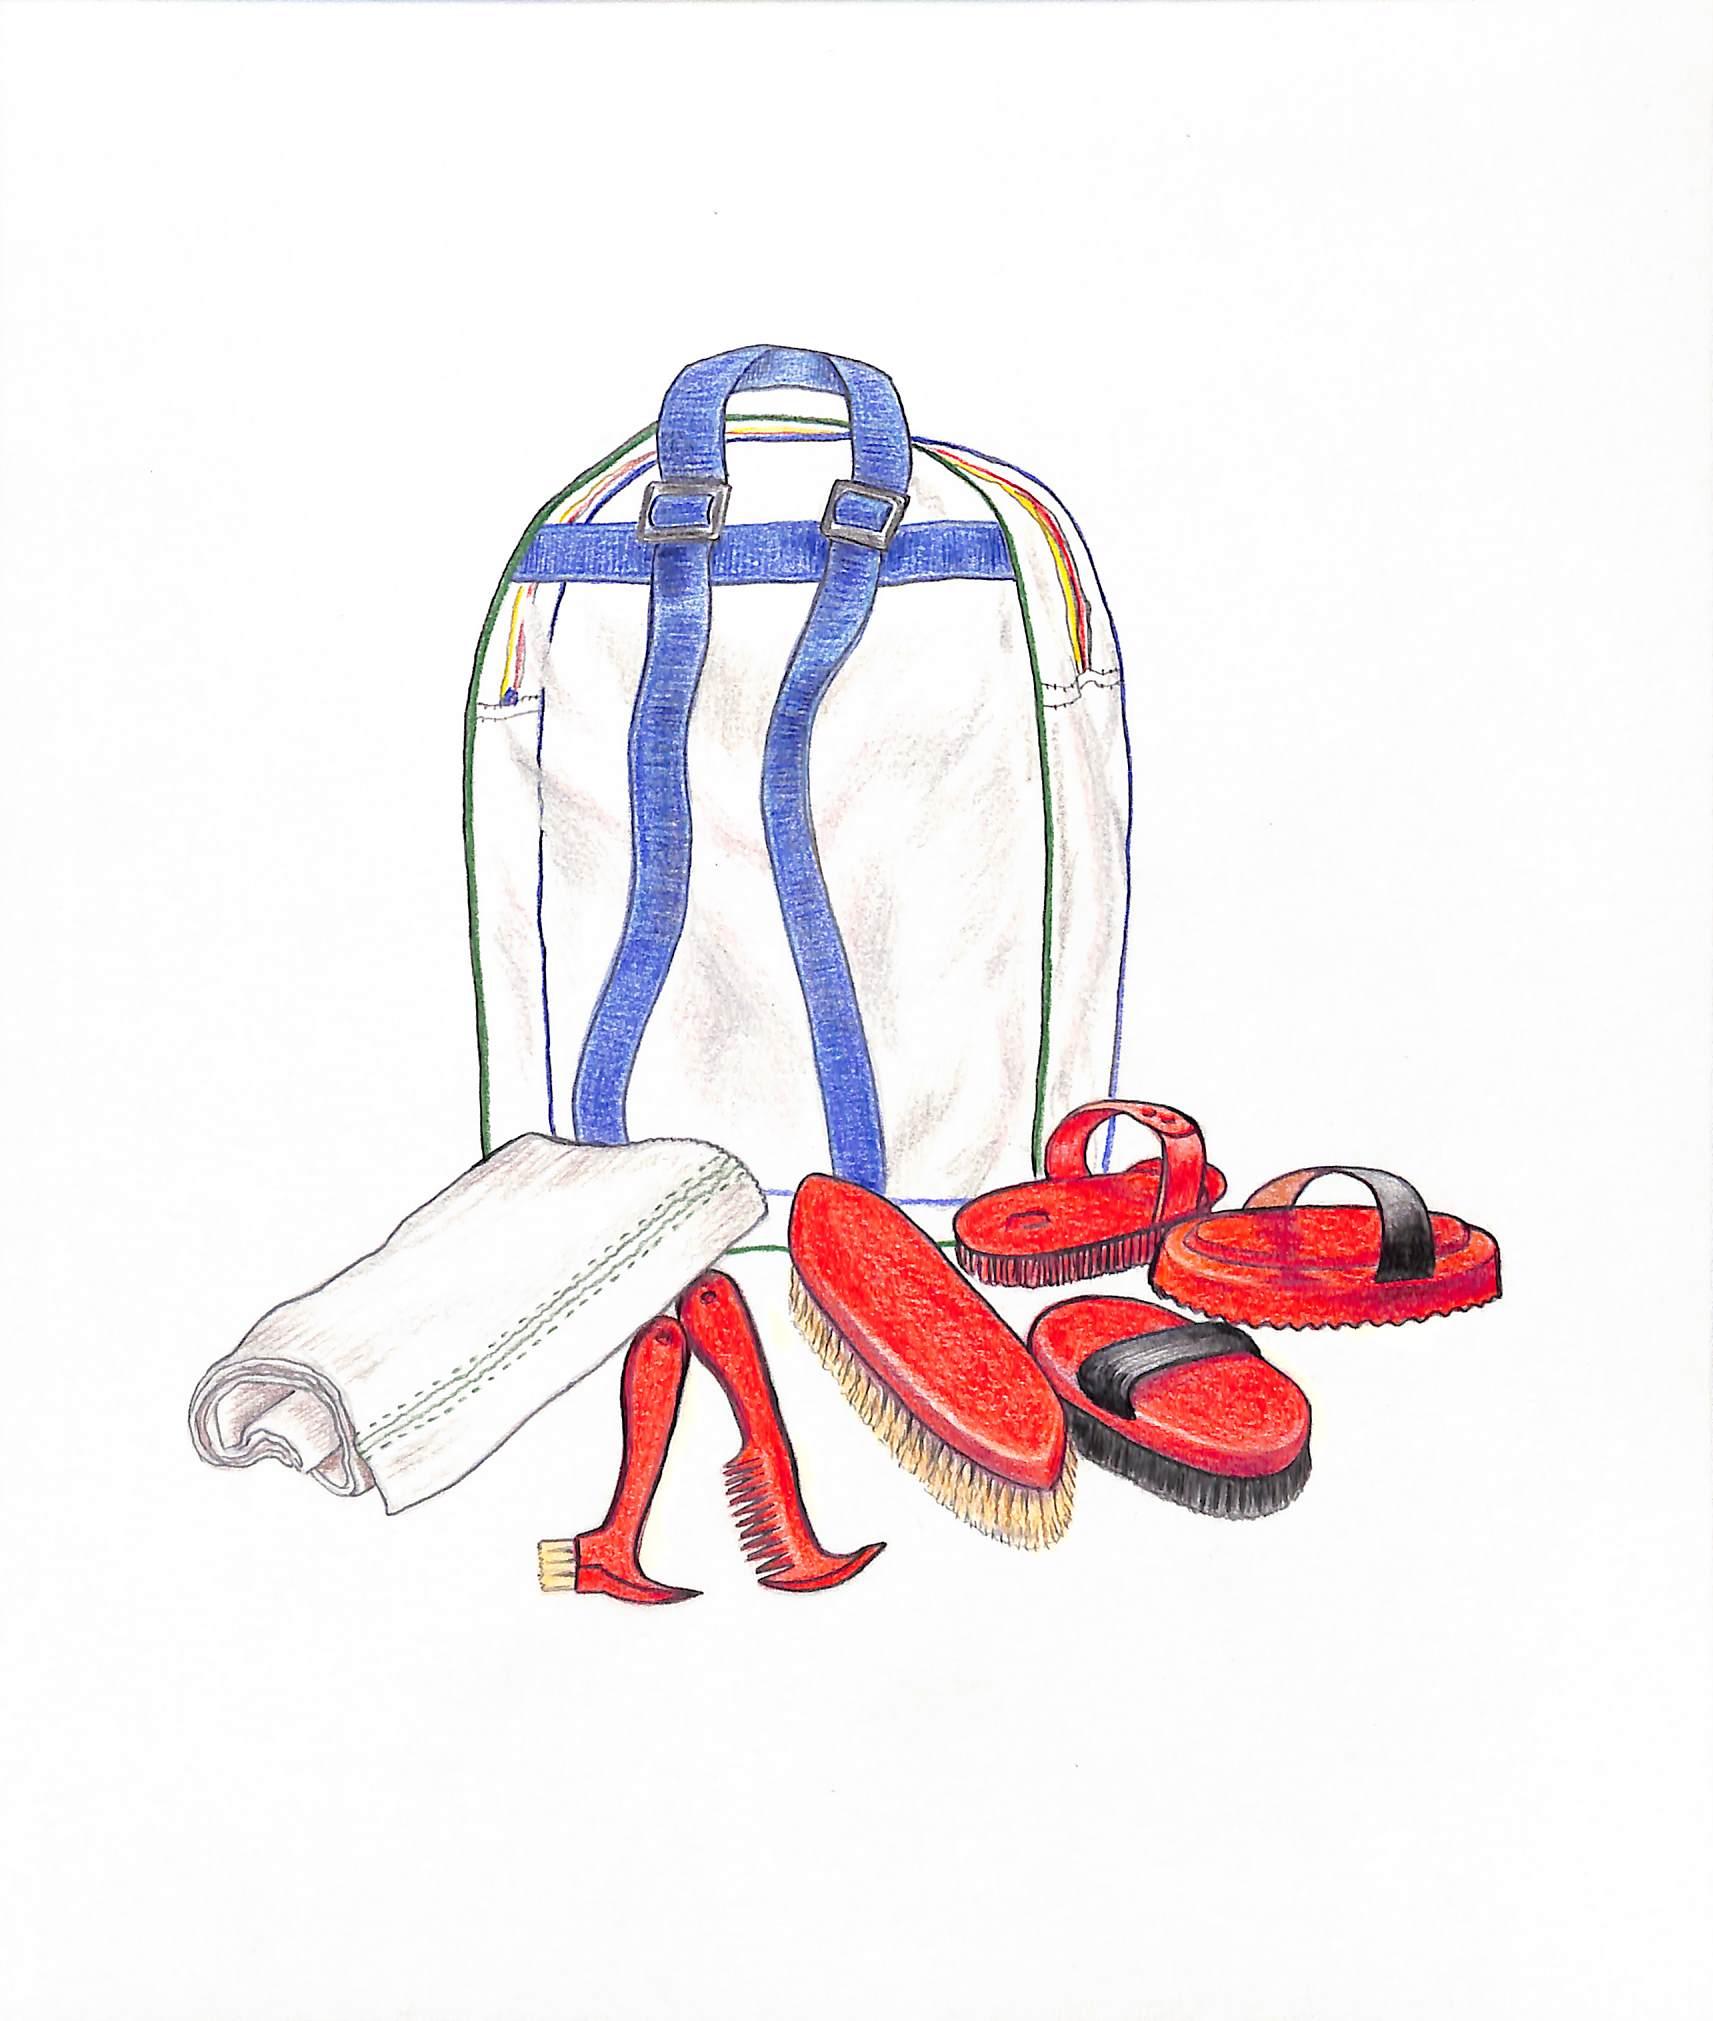 Shavepack, Pony Tack, & Equipment Watercolor - Art by Unknown